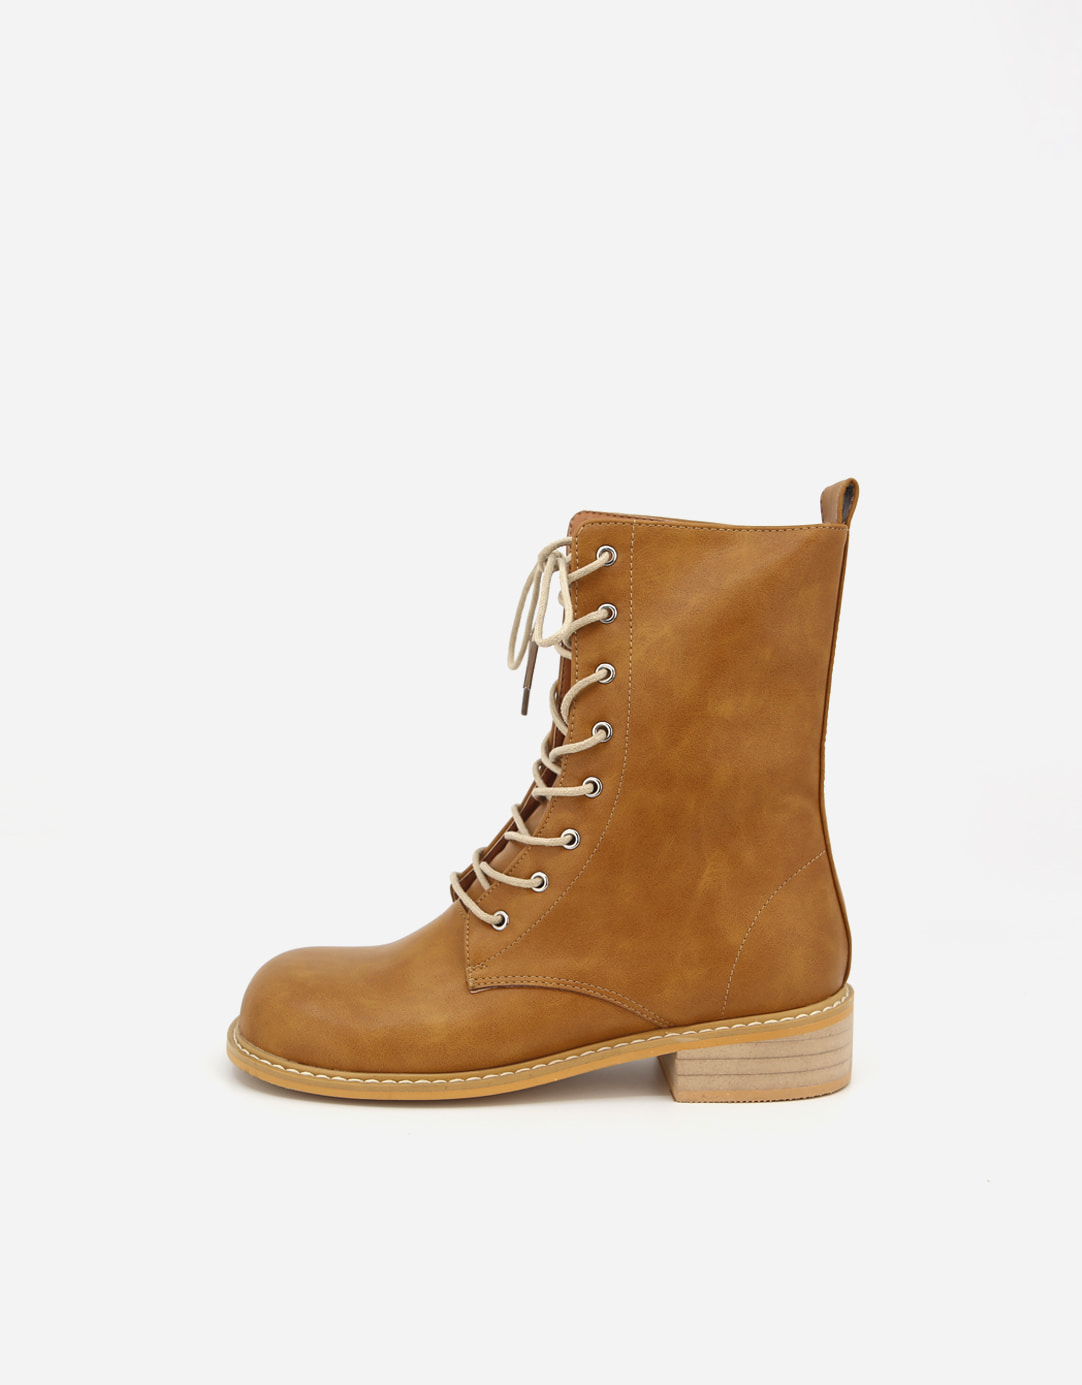 MANNISH LACE UP MIDDLE BOOTS